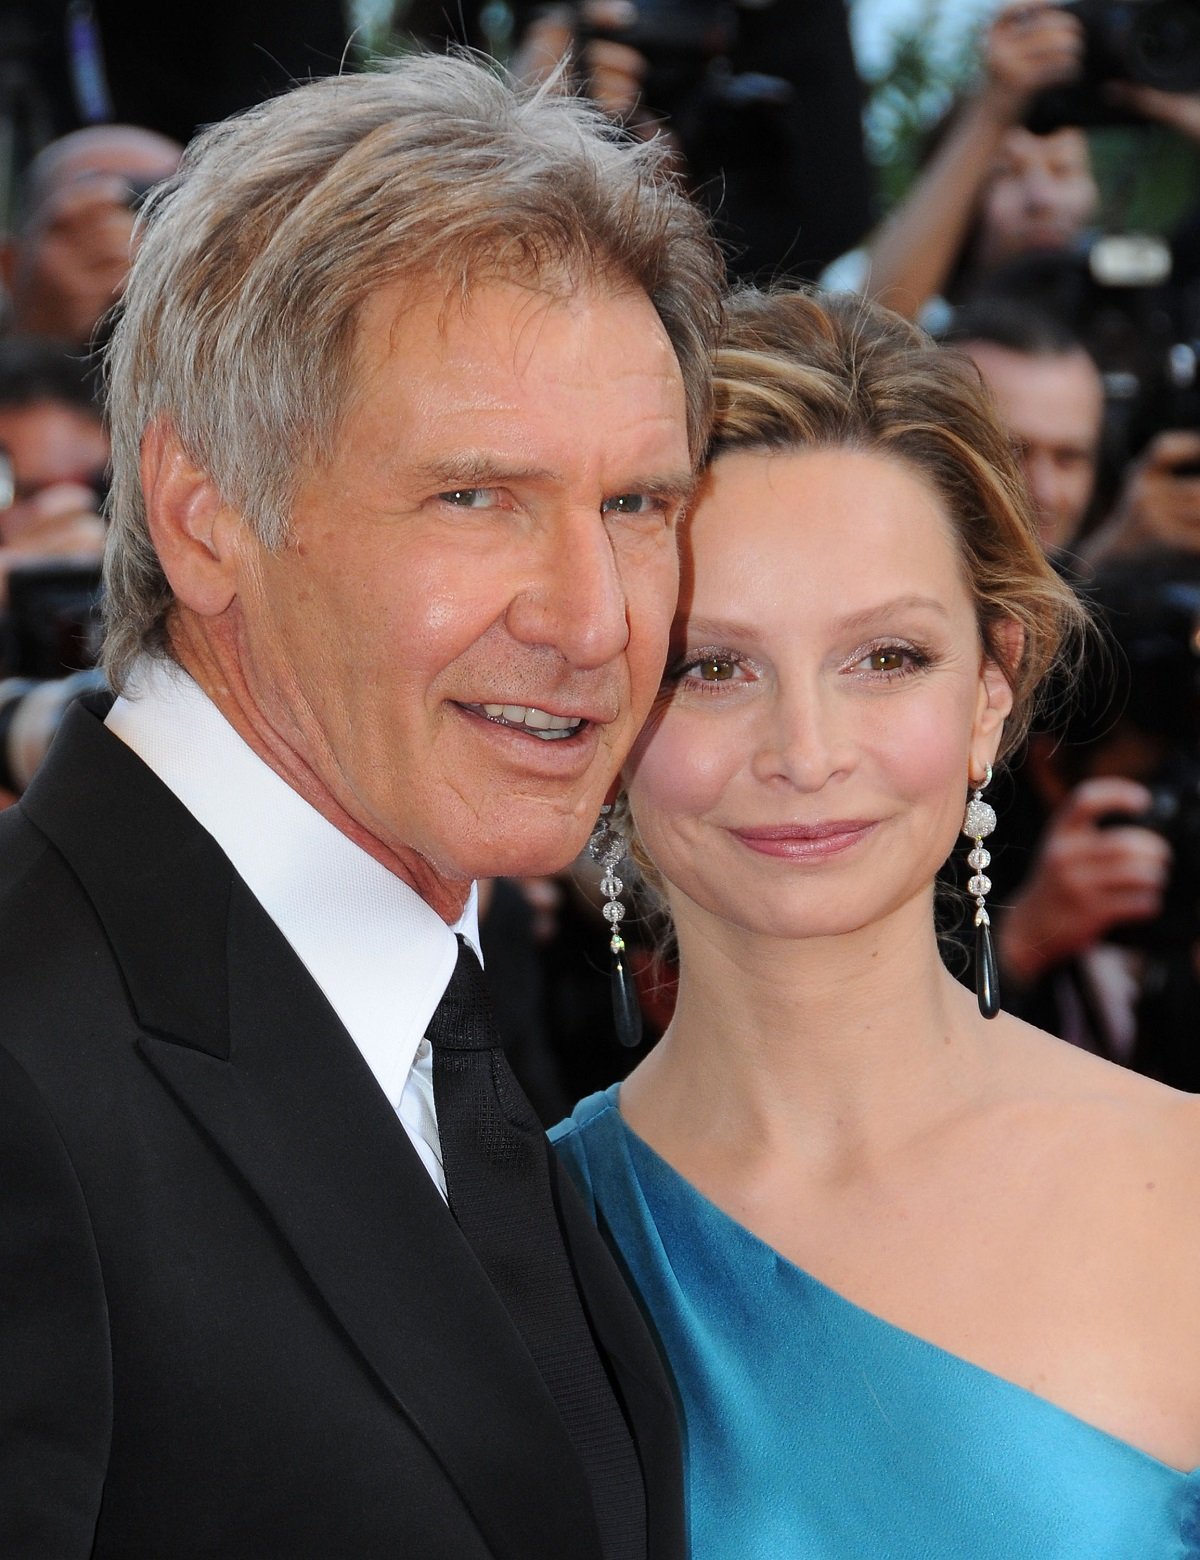 Harrison Ford and Calista Flockhart on May 18, 2008 in Cannes, France | Source: Getty Images